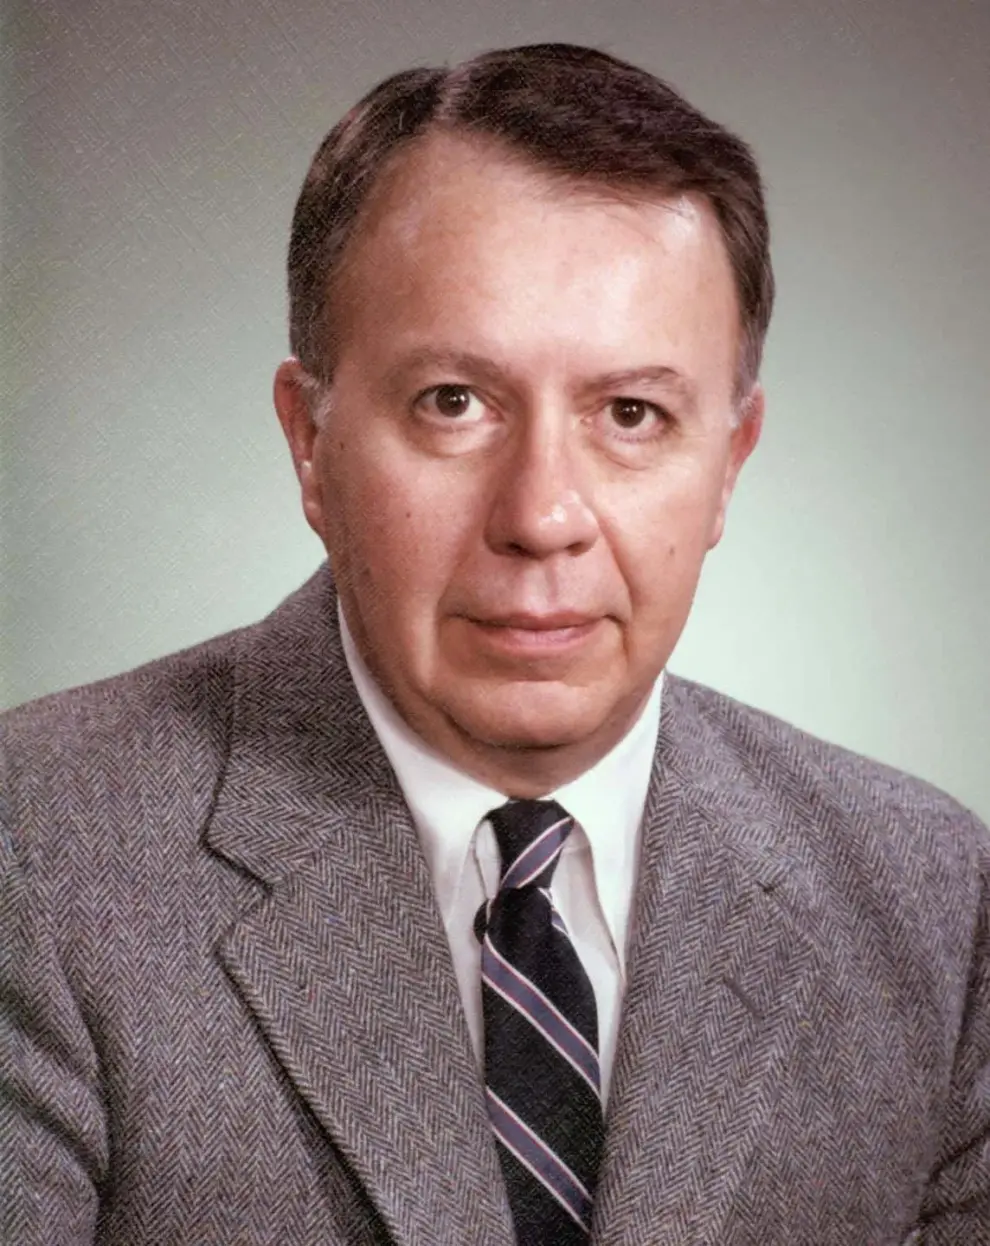 IN REMEMBRANCE OF  STRUCTURAL ENGINEER CHARLES H. RATHS